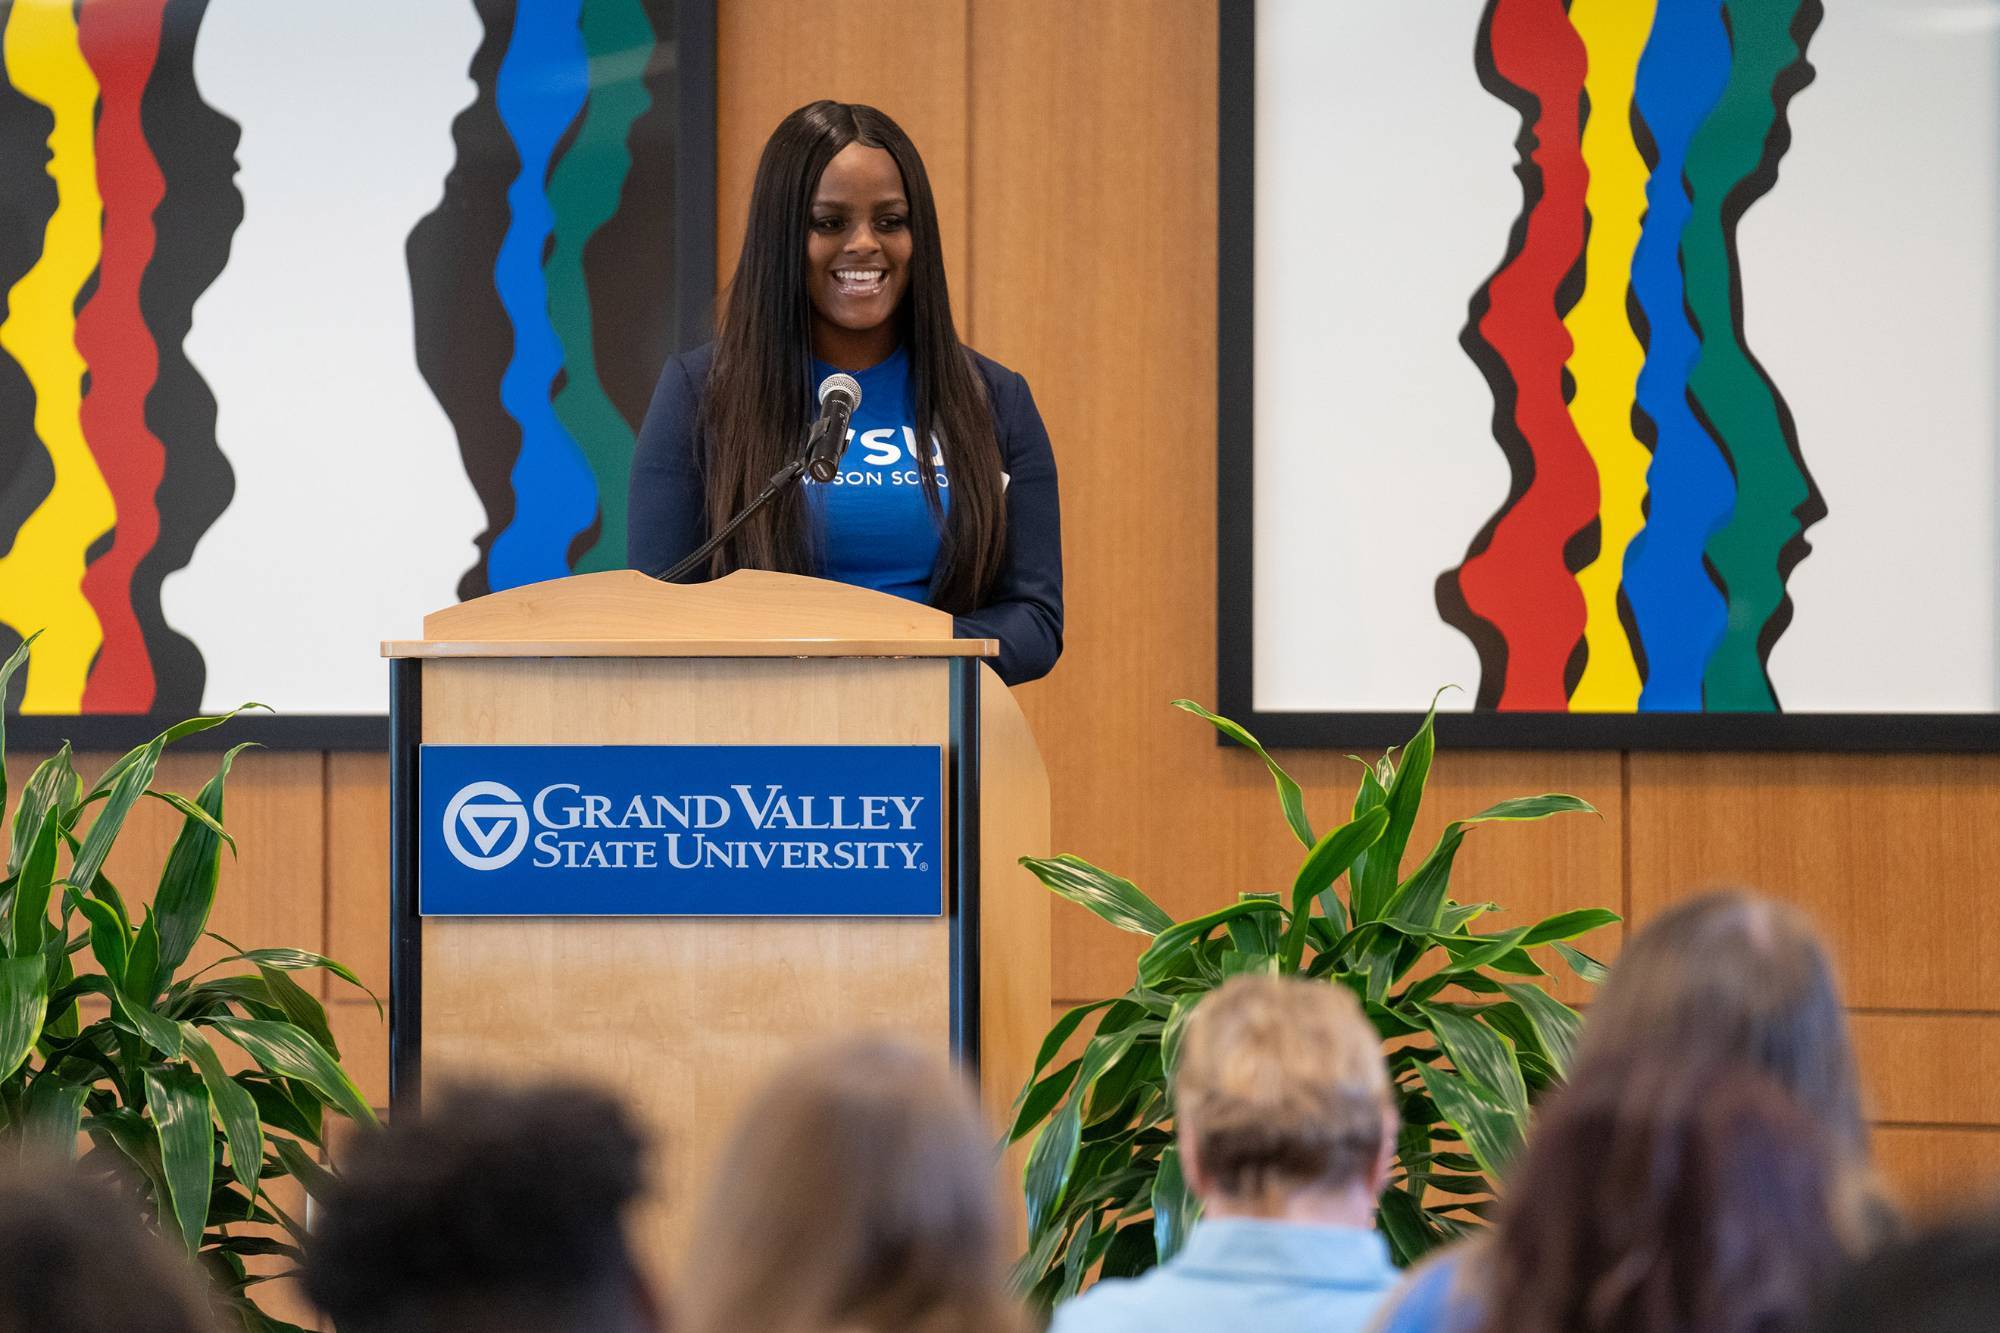 Domonique Palmer addresses a GVSU audience from a lecturn